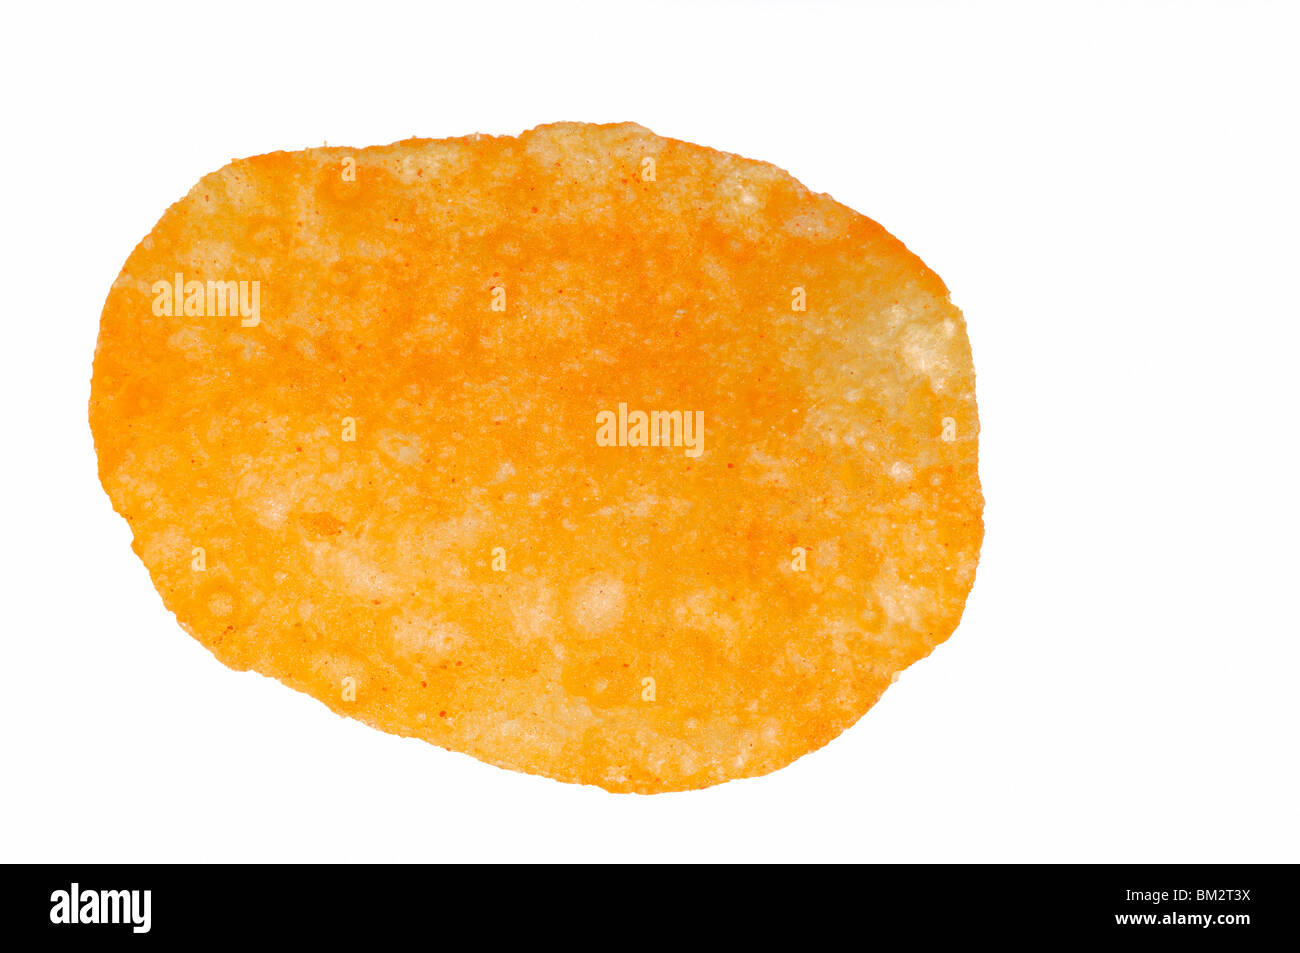 Potato Chip isolated on white Banque D'Images